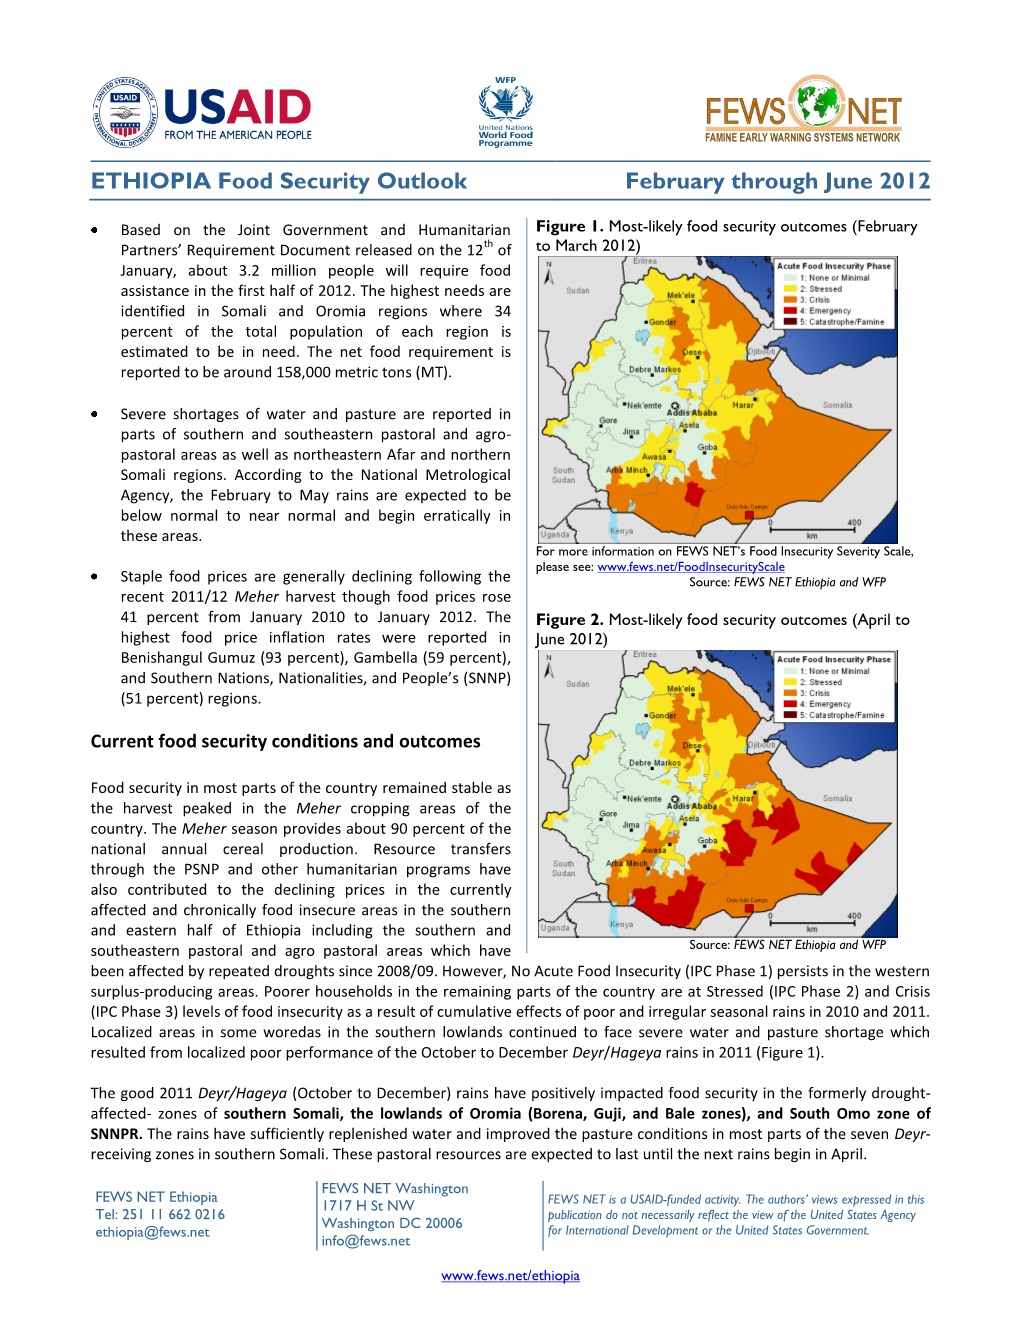 ETHIOPIA Food Security Outlook February Through June 2012